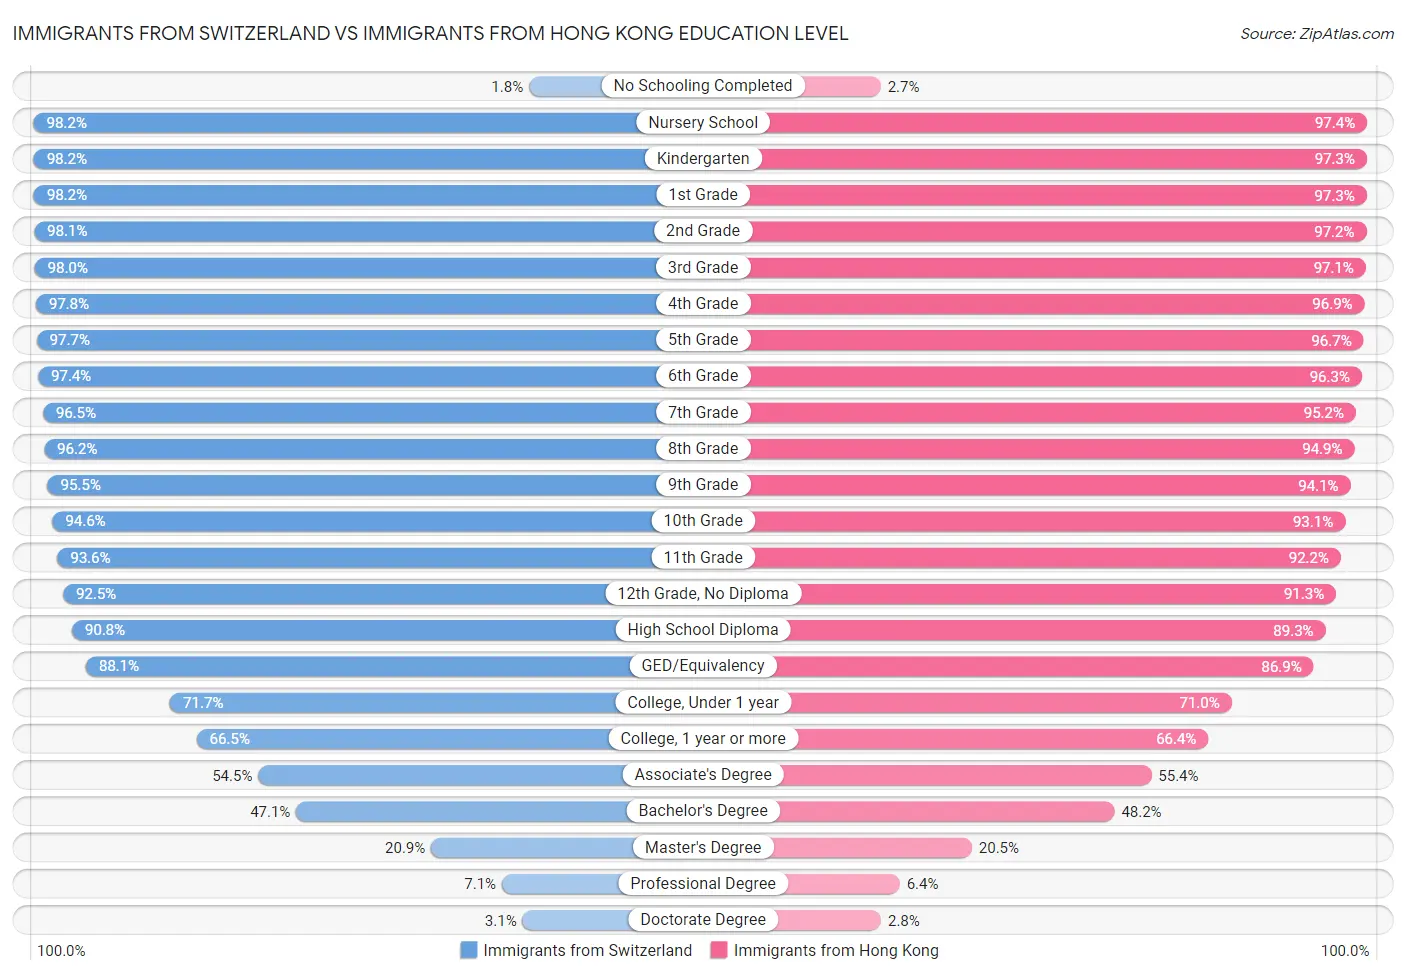 Immigrants from Switzerland vs Immigrants from Hong Kong Education Level